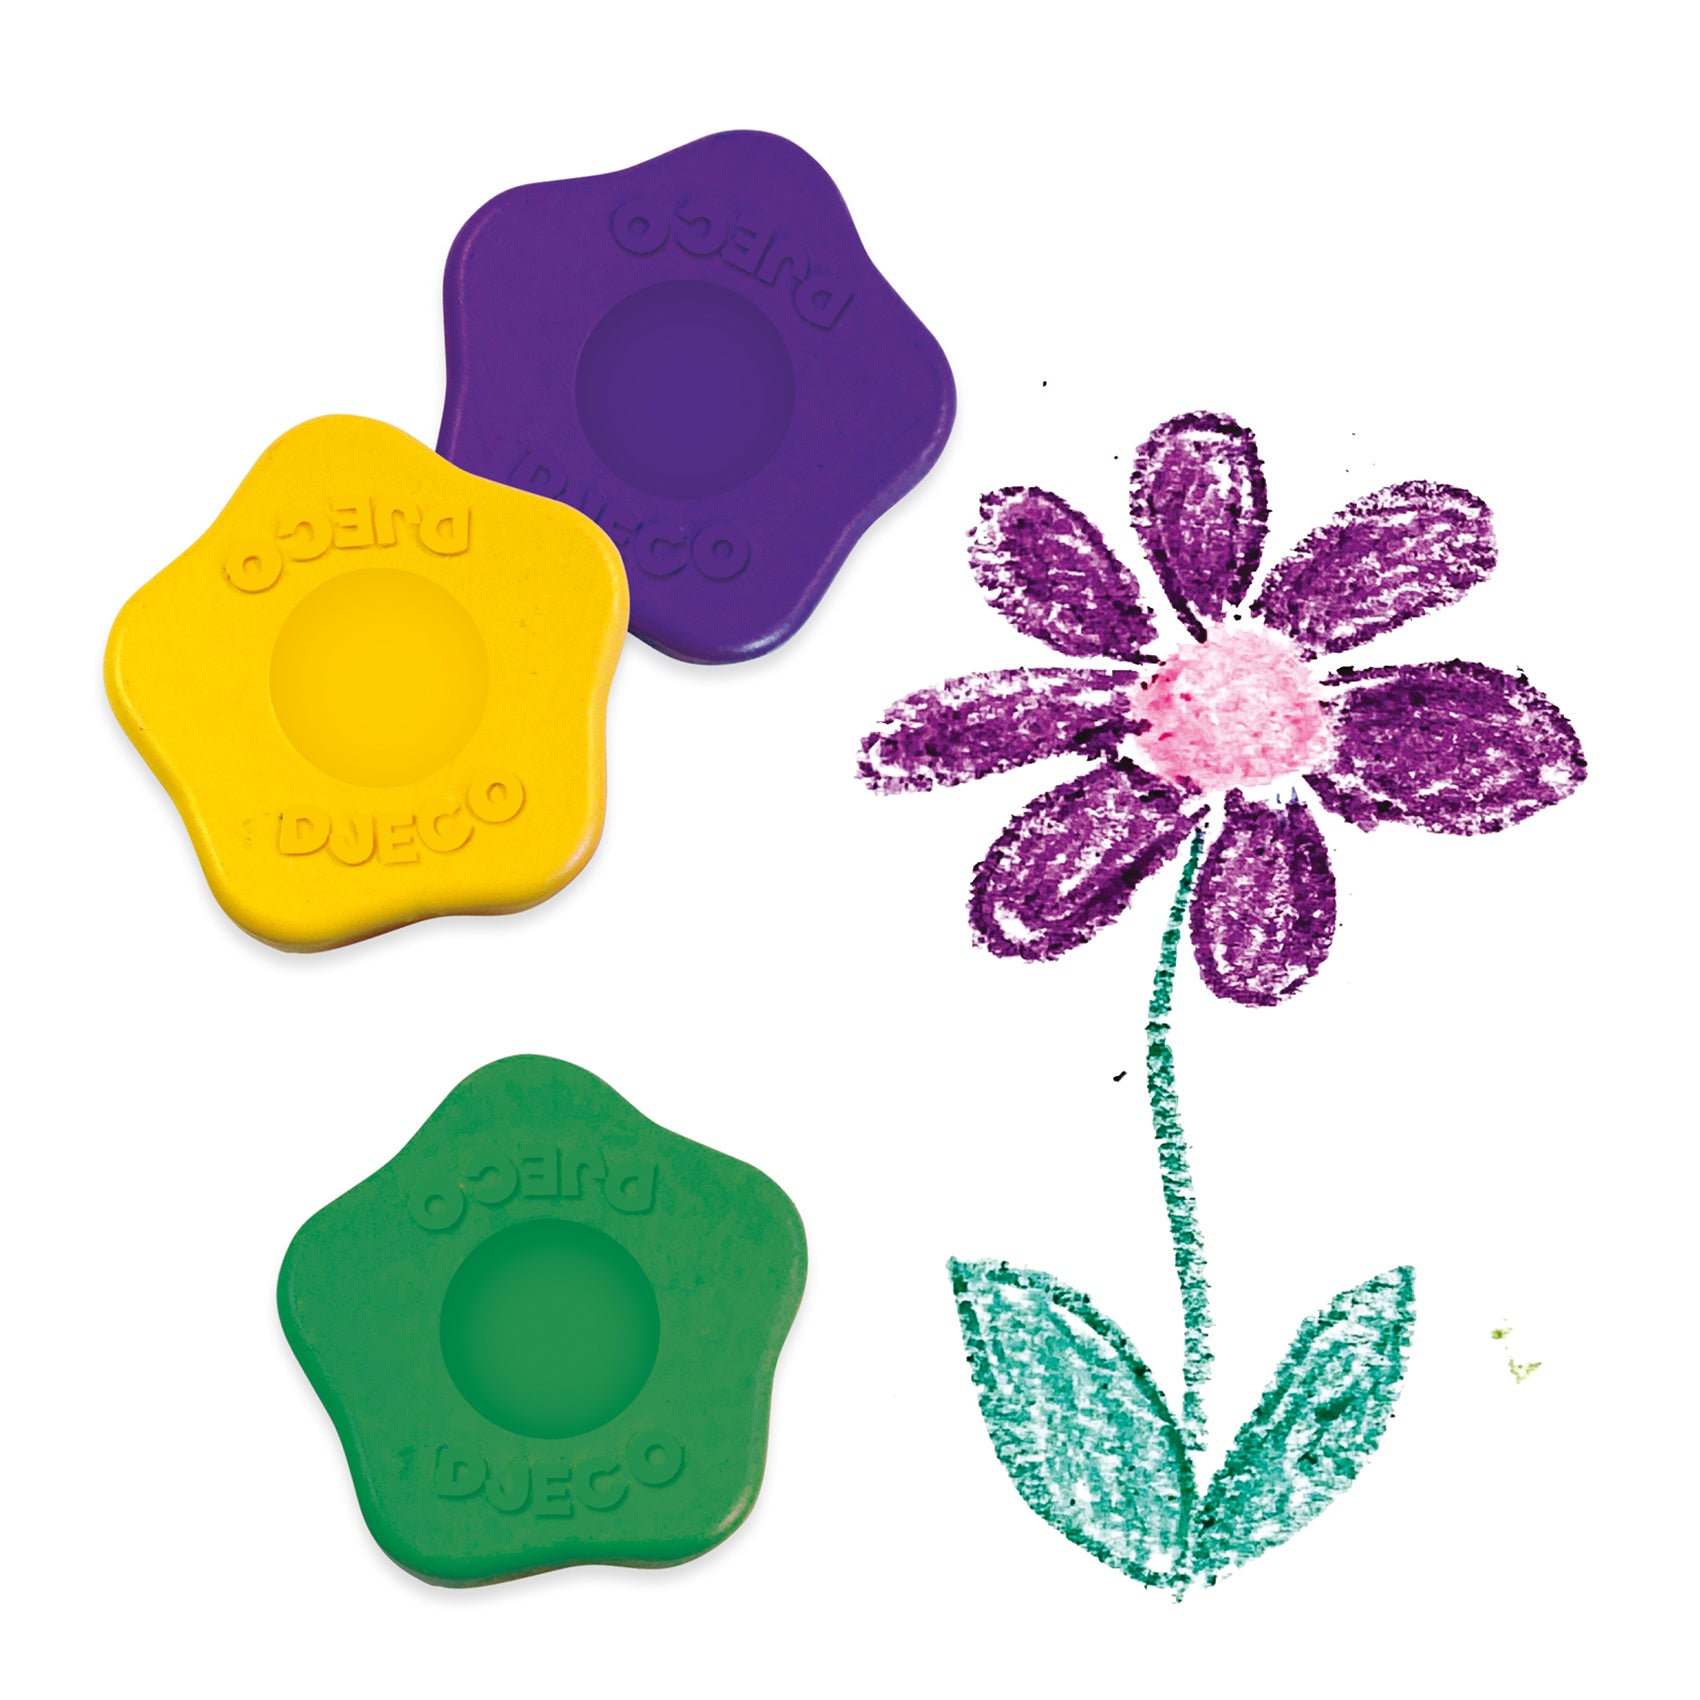 Djeco 12 Flower Pencils for Toddlers